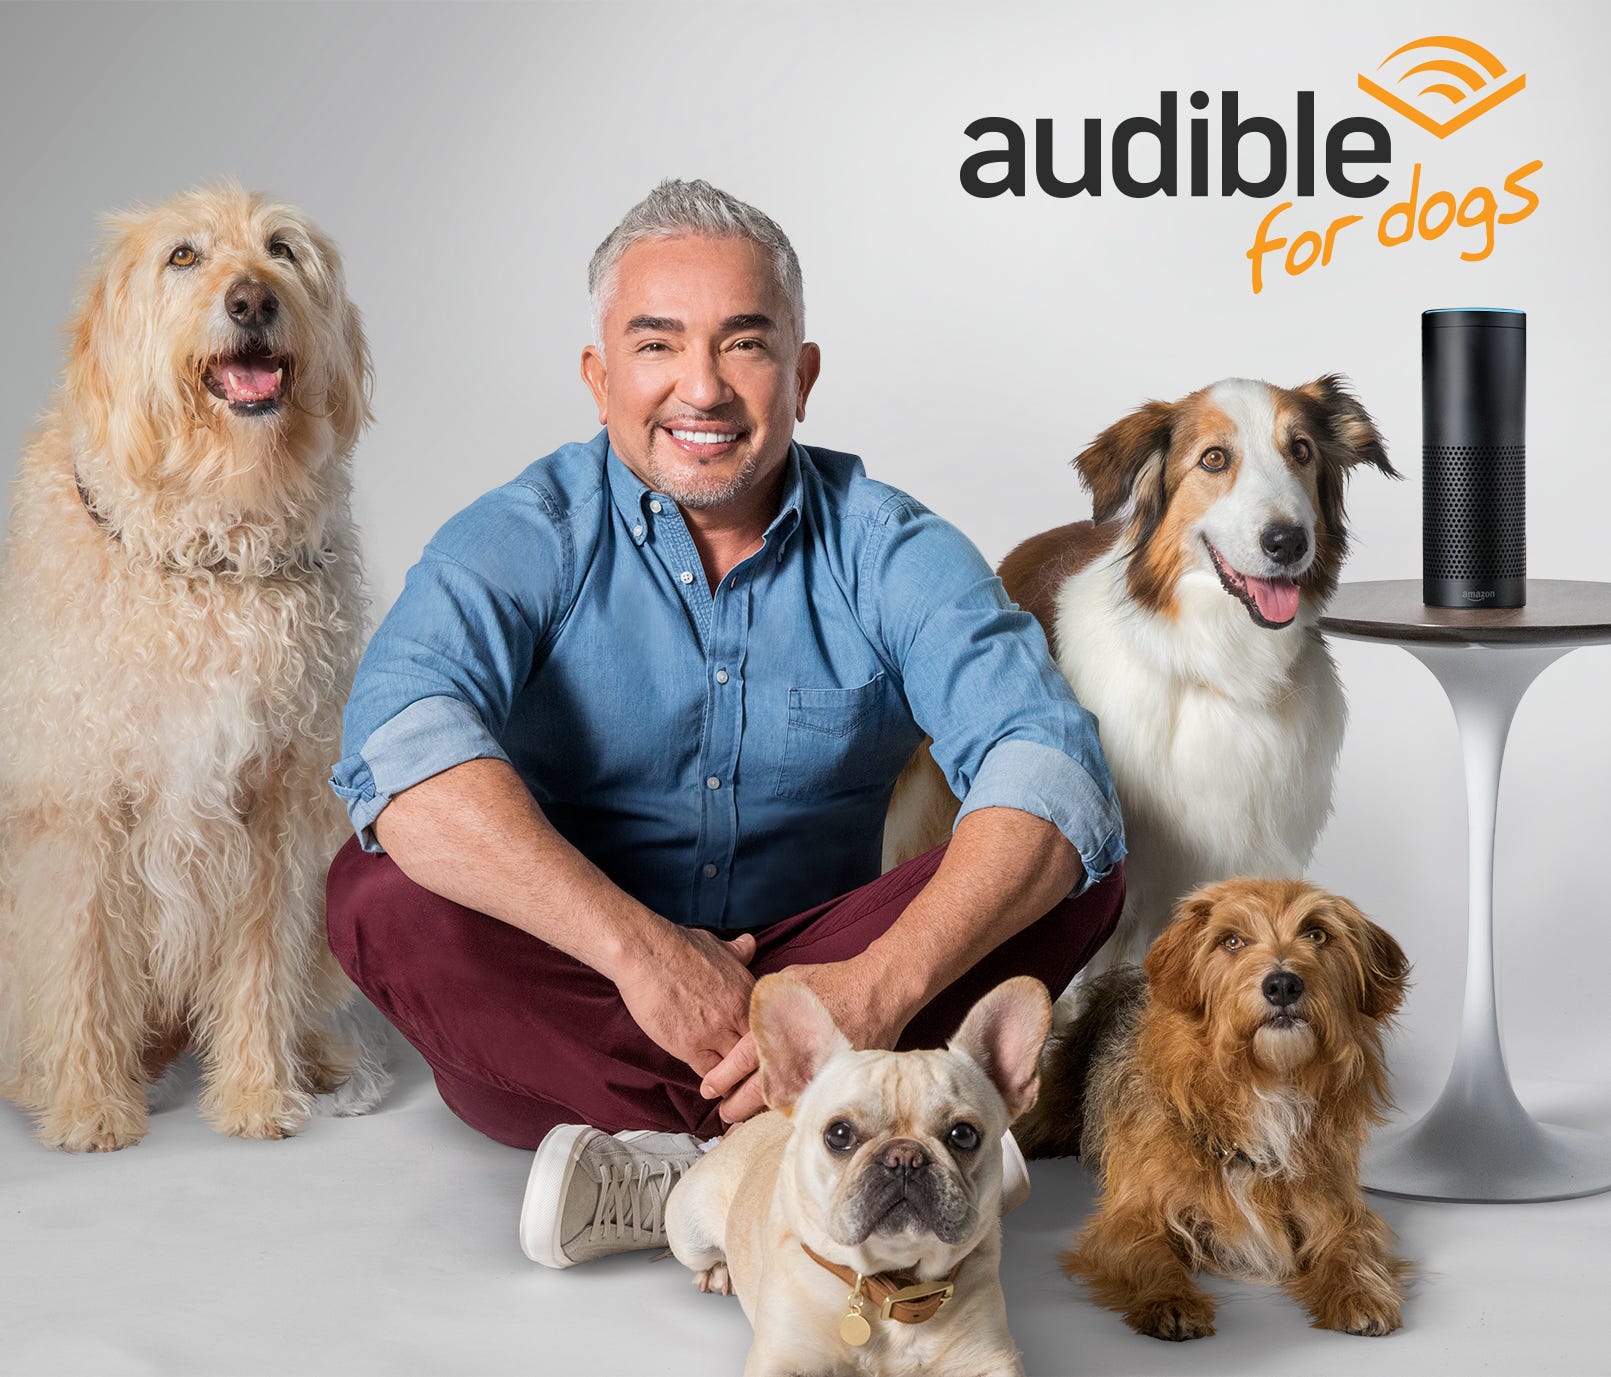 Audible is teaming up with Dog Whisperer Cesar Millan to get your dog to listen to classic literature.